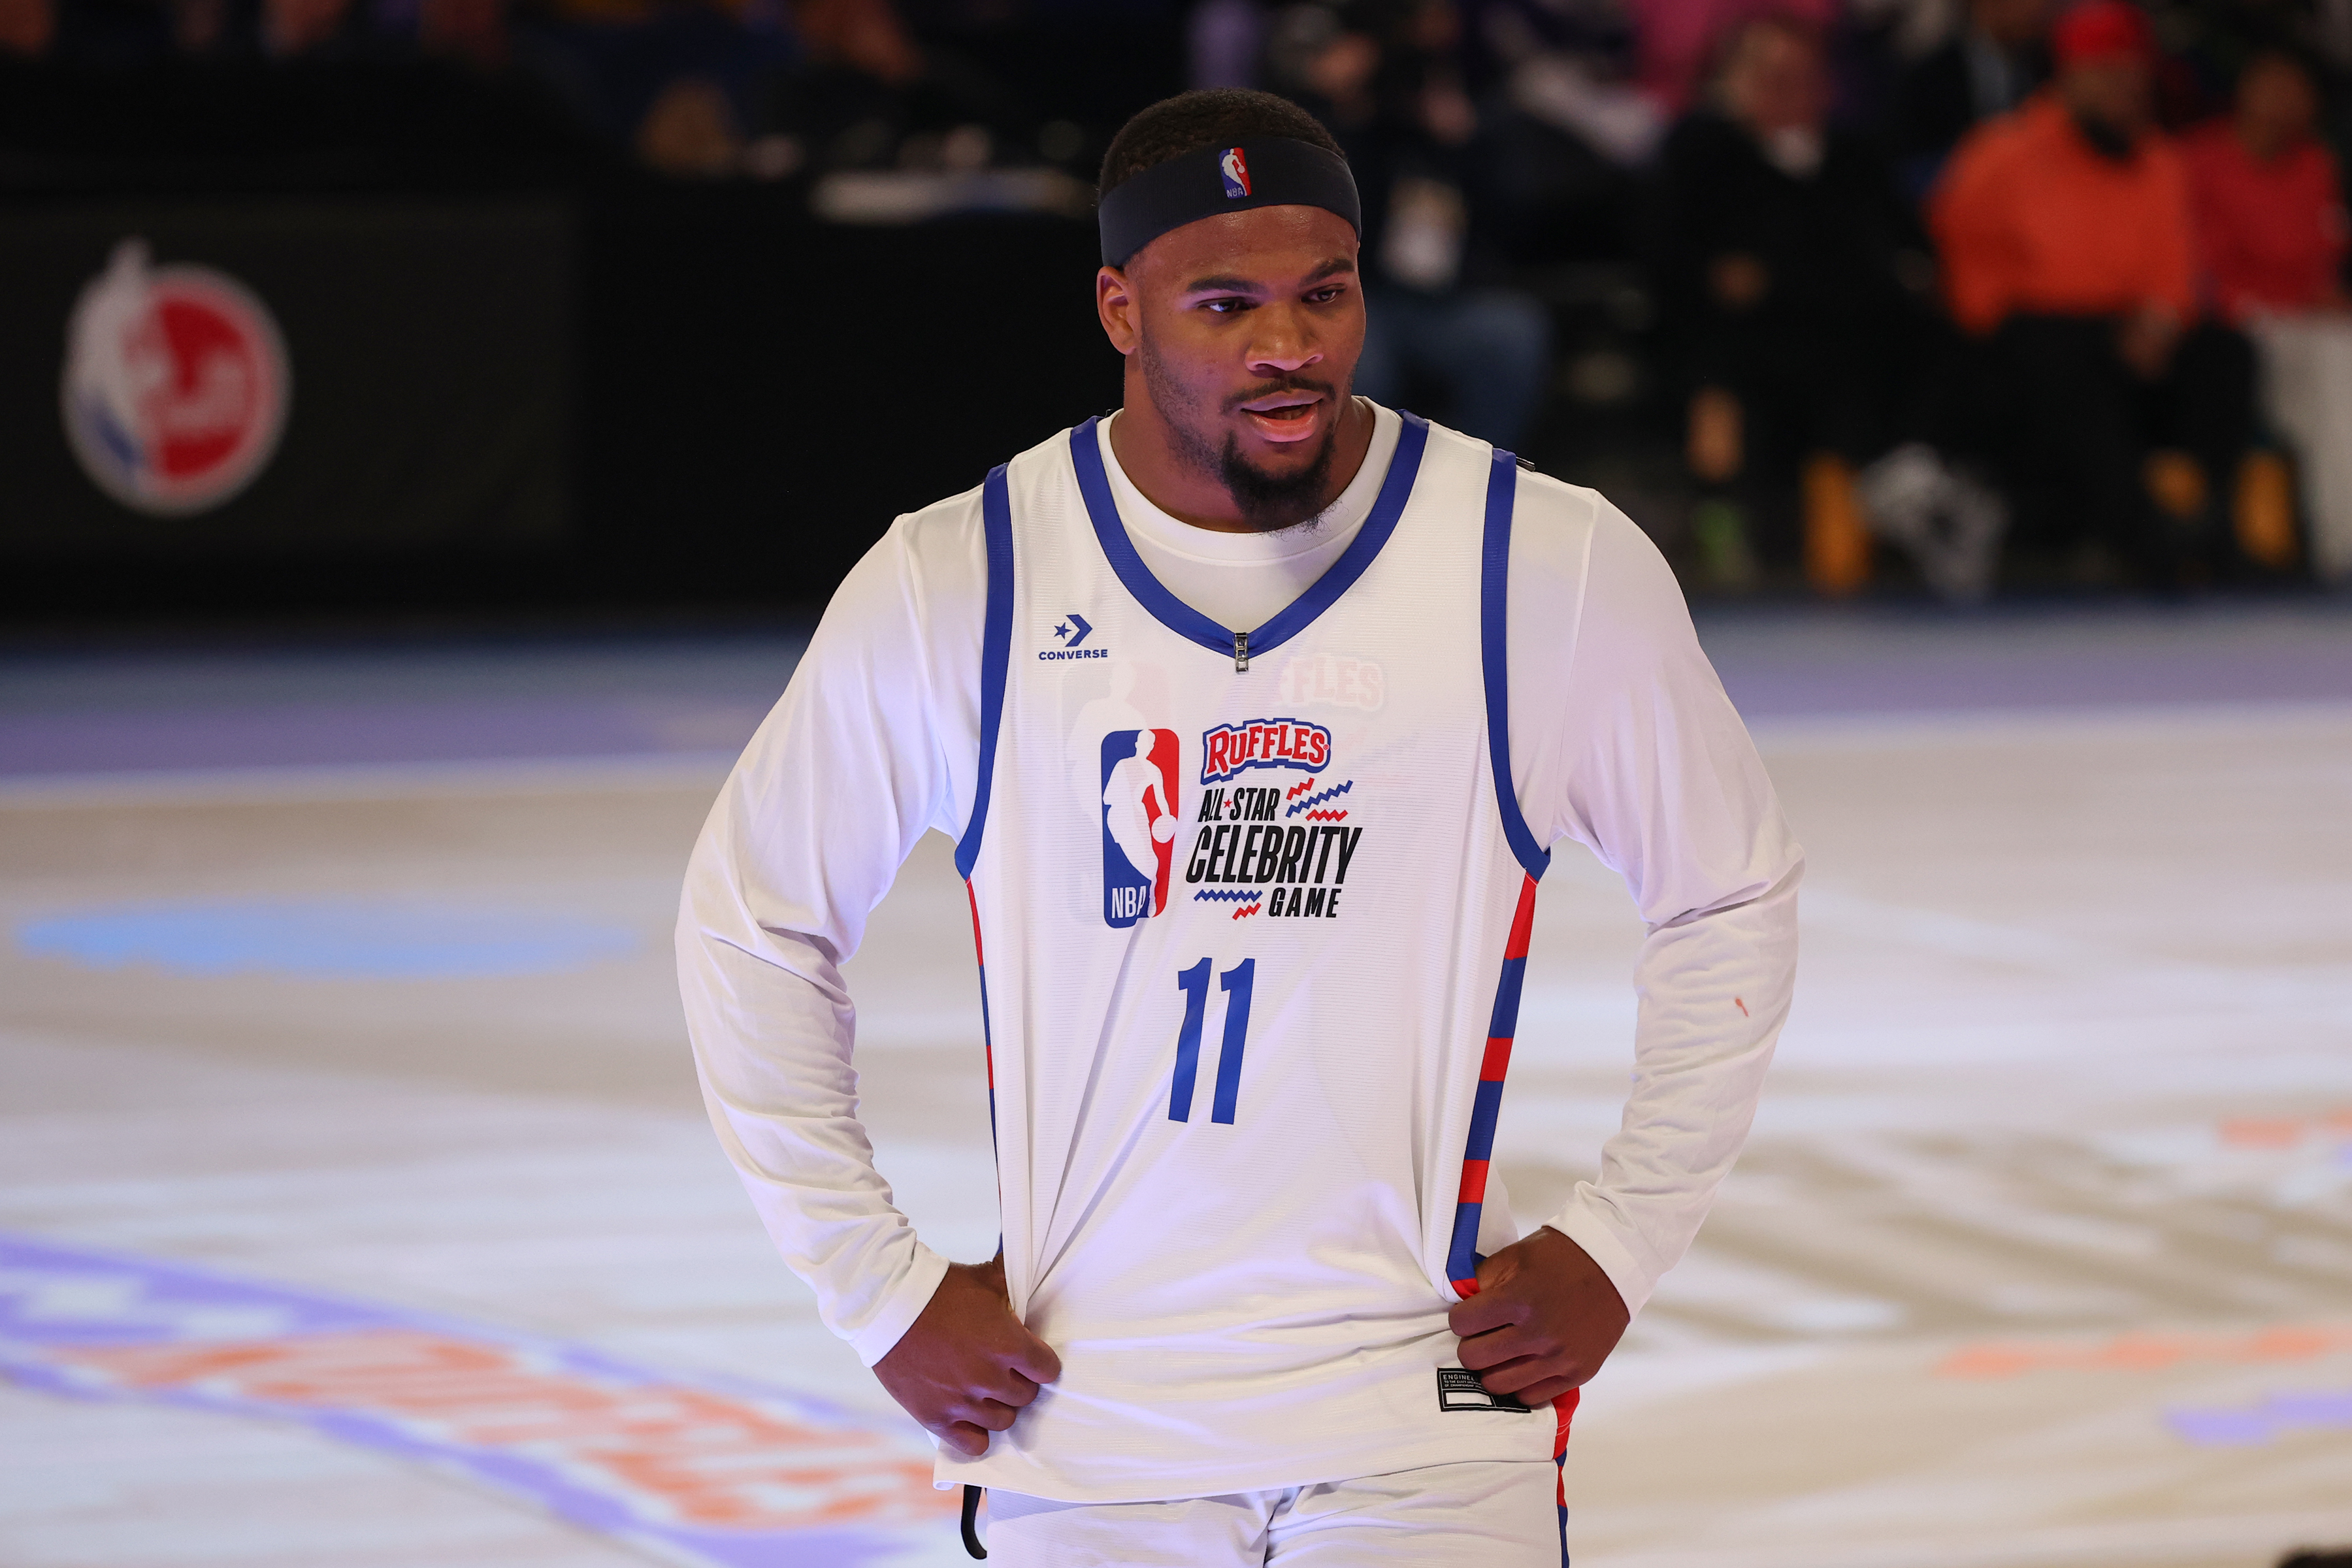 Person in a basketball jersey with &quot;Ruffles Celebrity Game&quot; text stands on the court